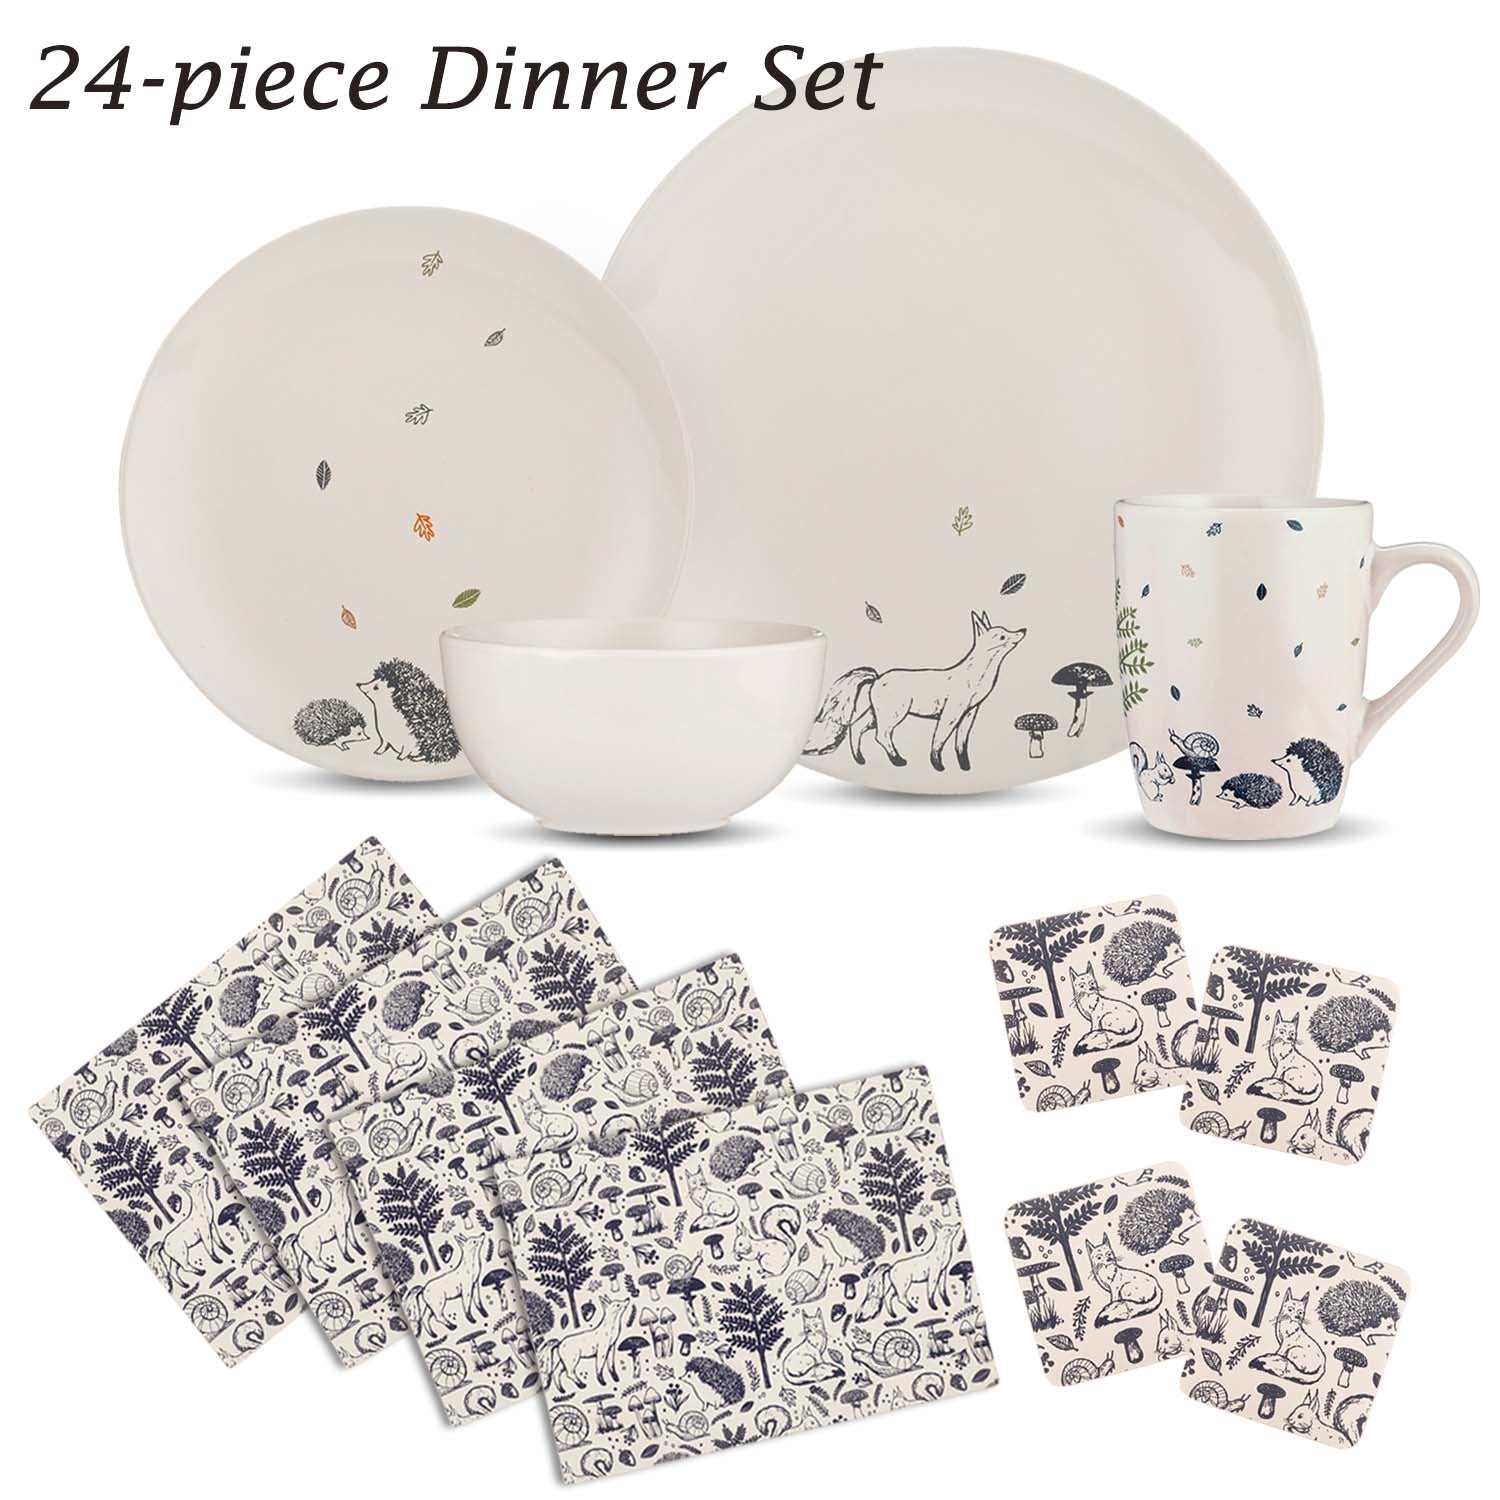 16Pc Woodland Stoneware Tableware With 8Pc Placemats & Coasters Set